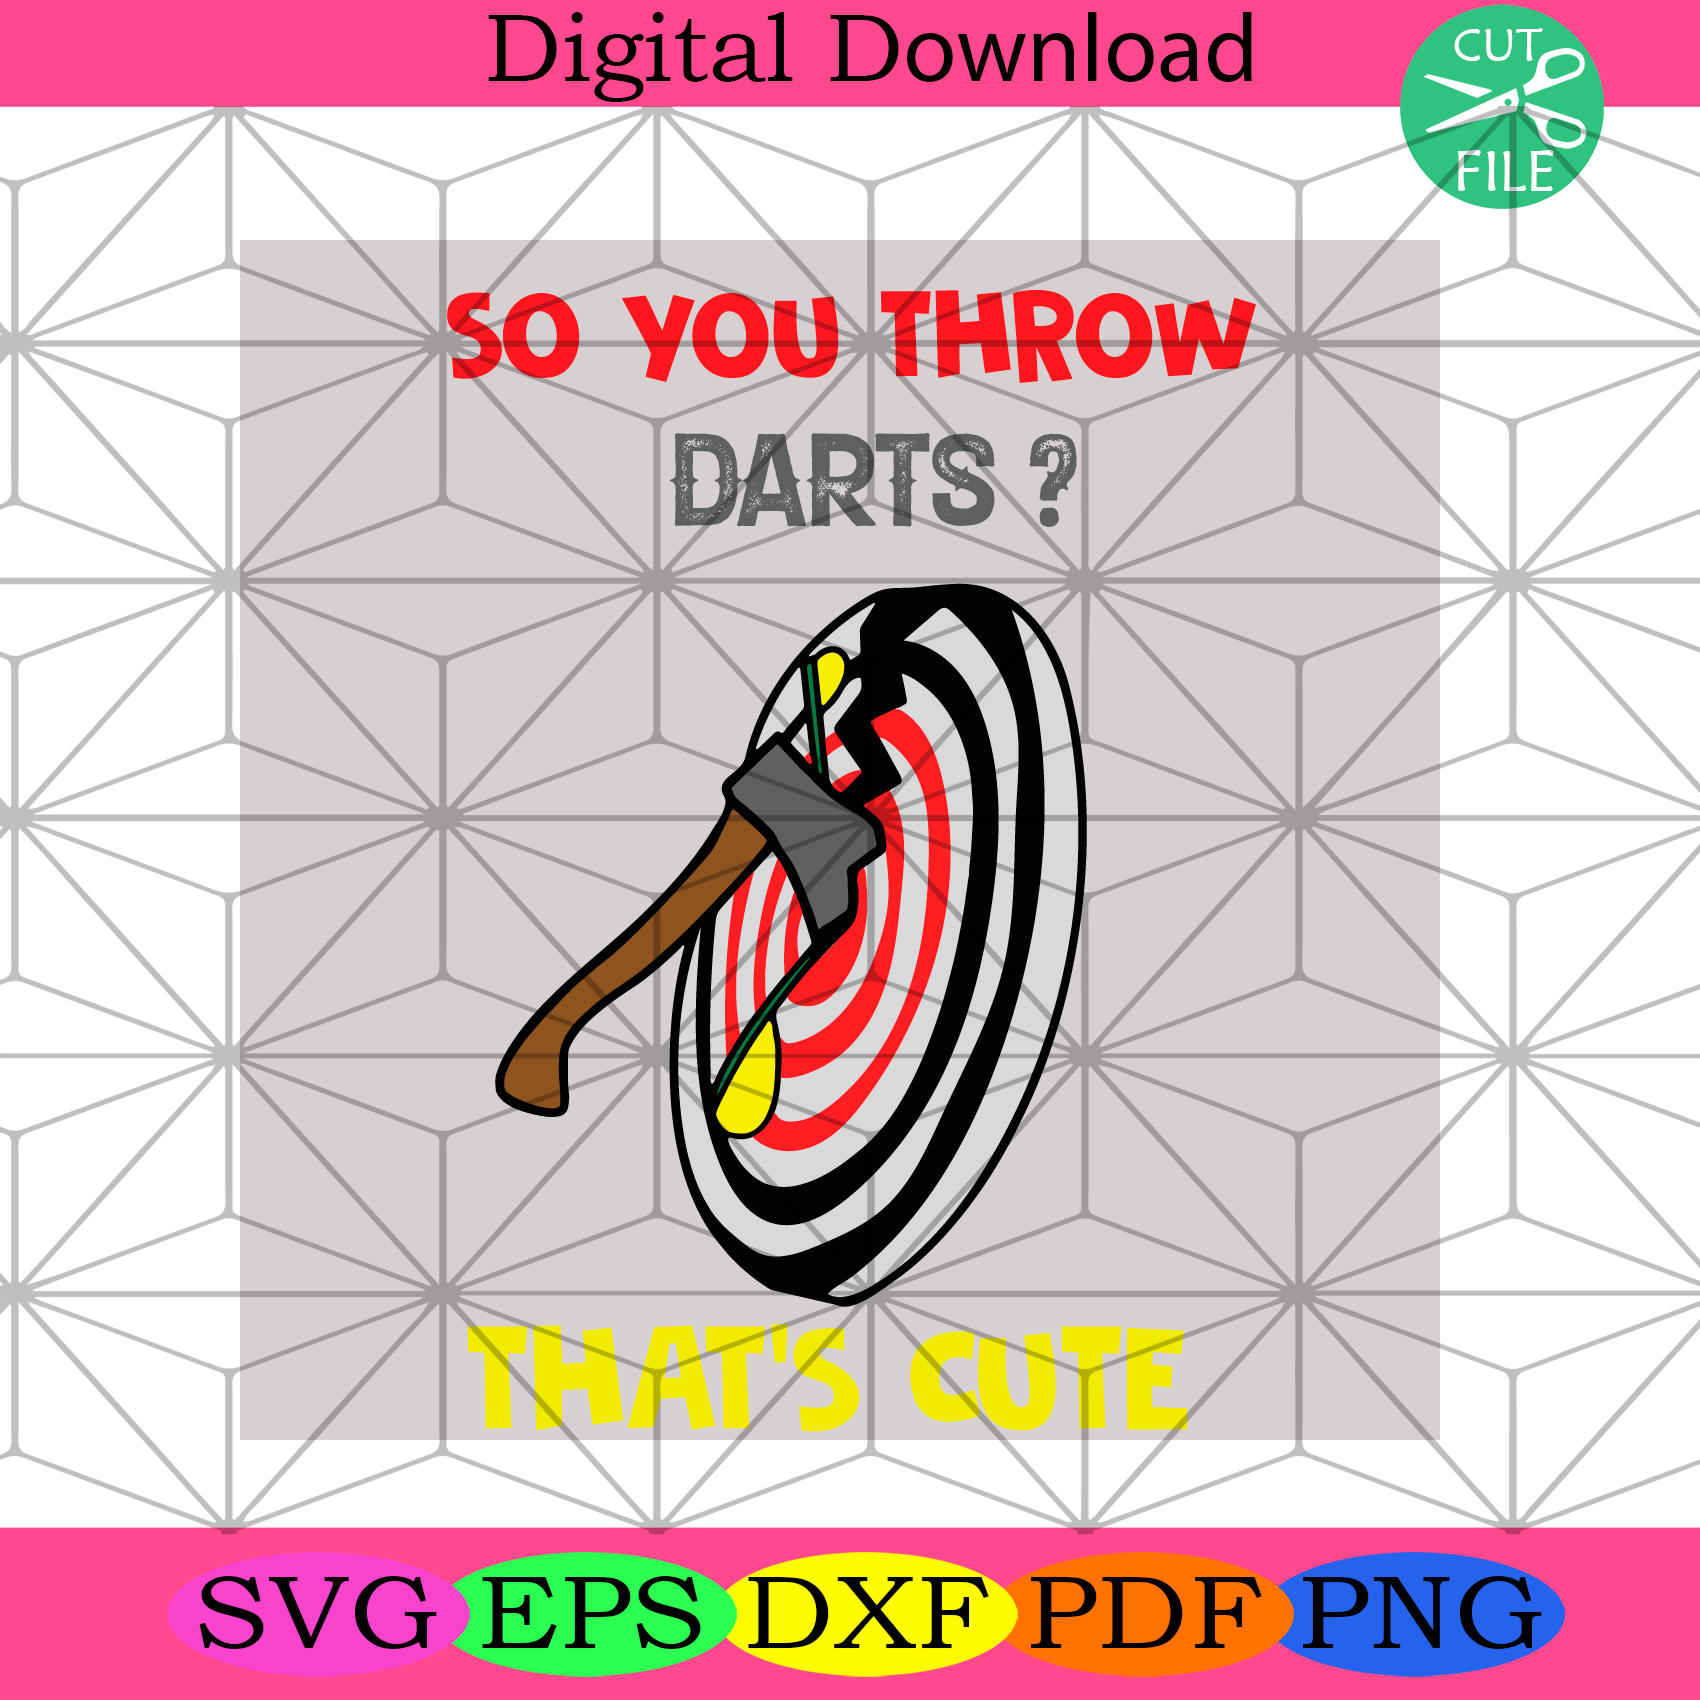 So You Throw Darts That Is Cute Svg Trending Svg, Axe Svg